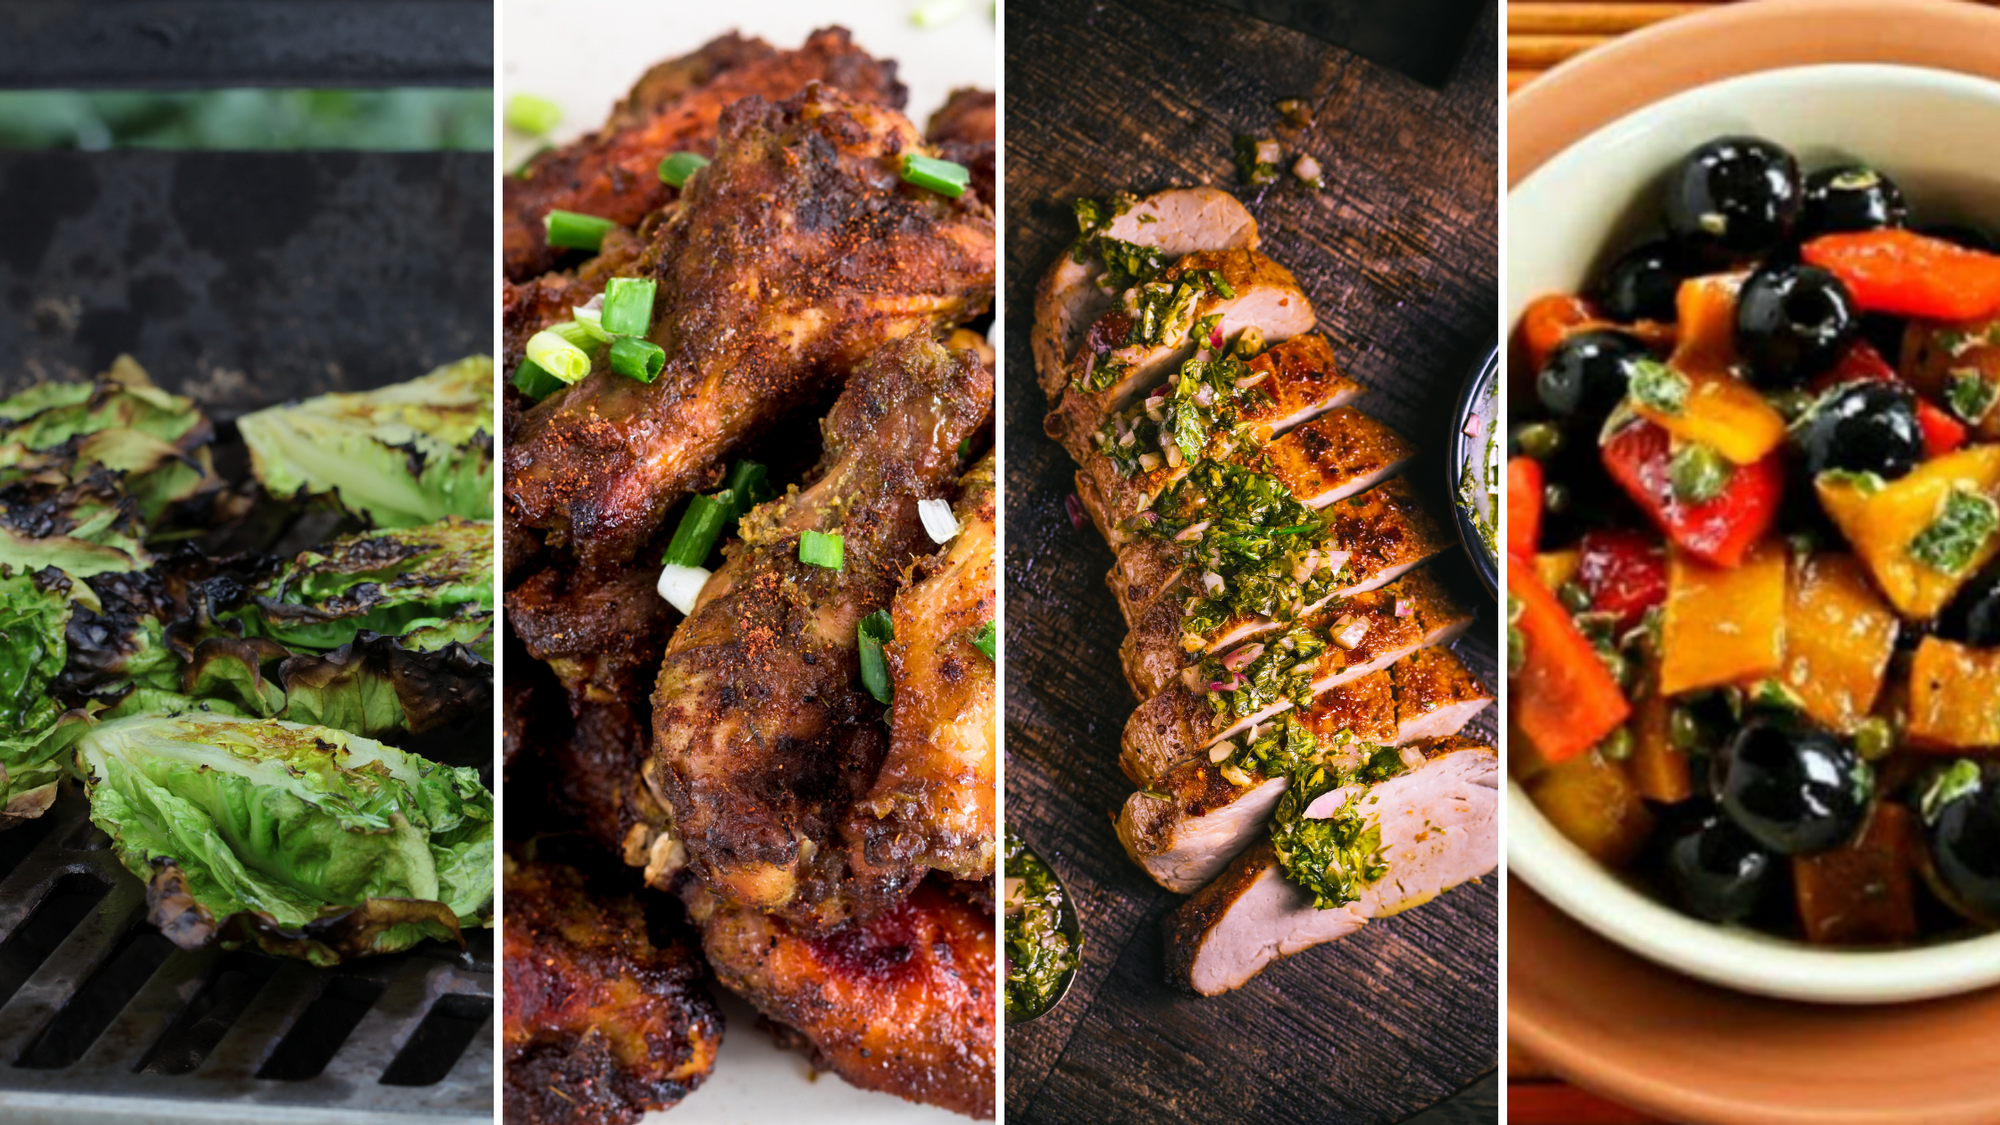 Impress Your Guests with Beginner-Friendly Recipes this BBQ season